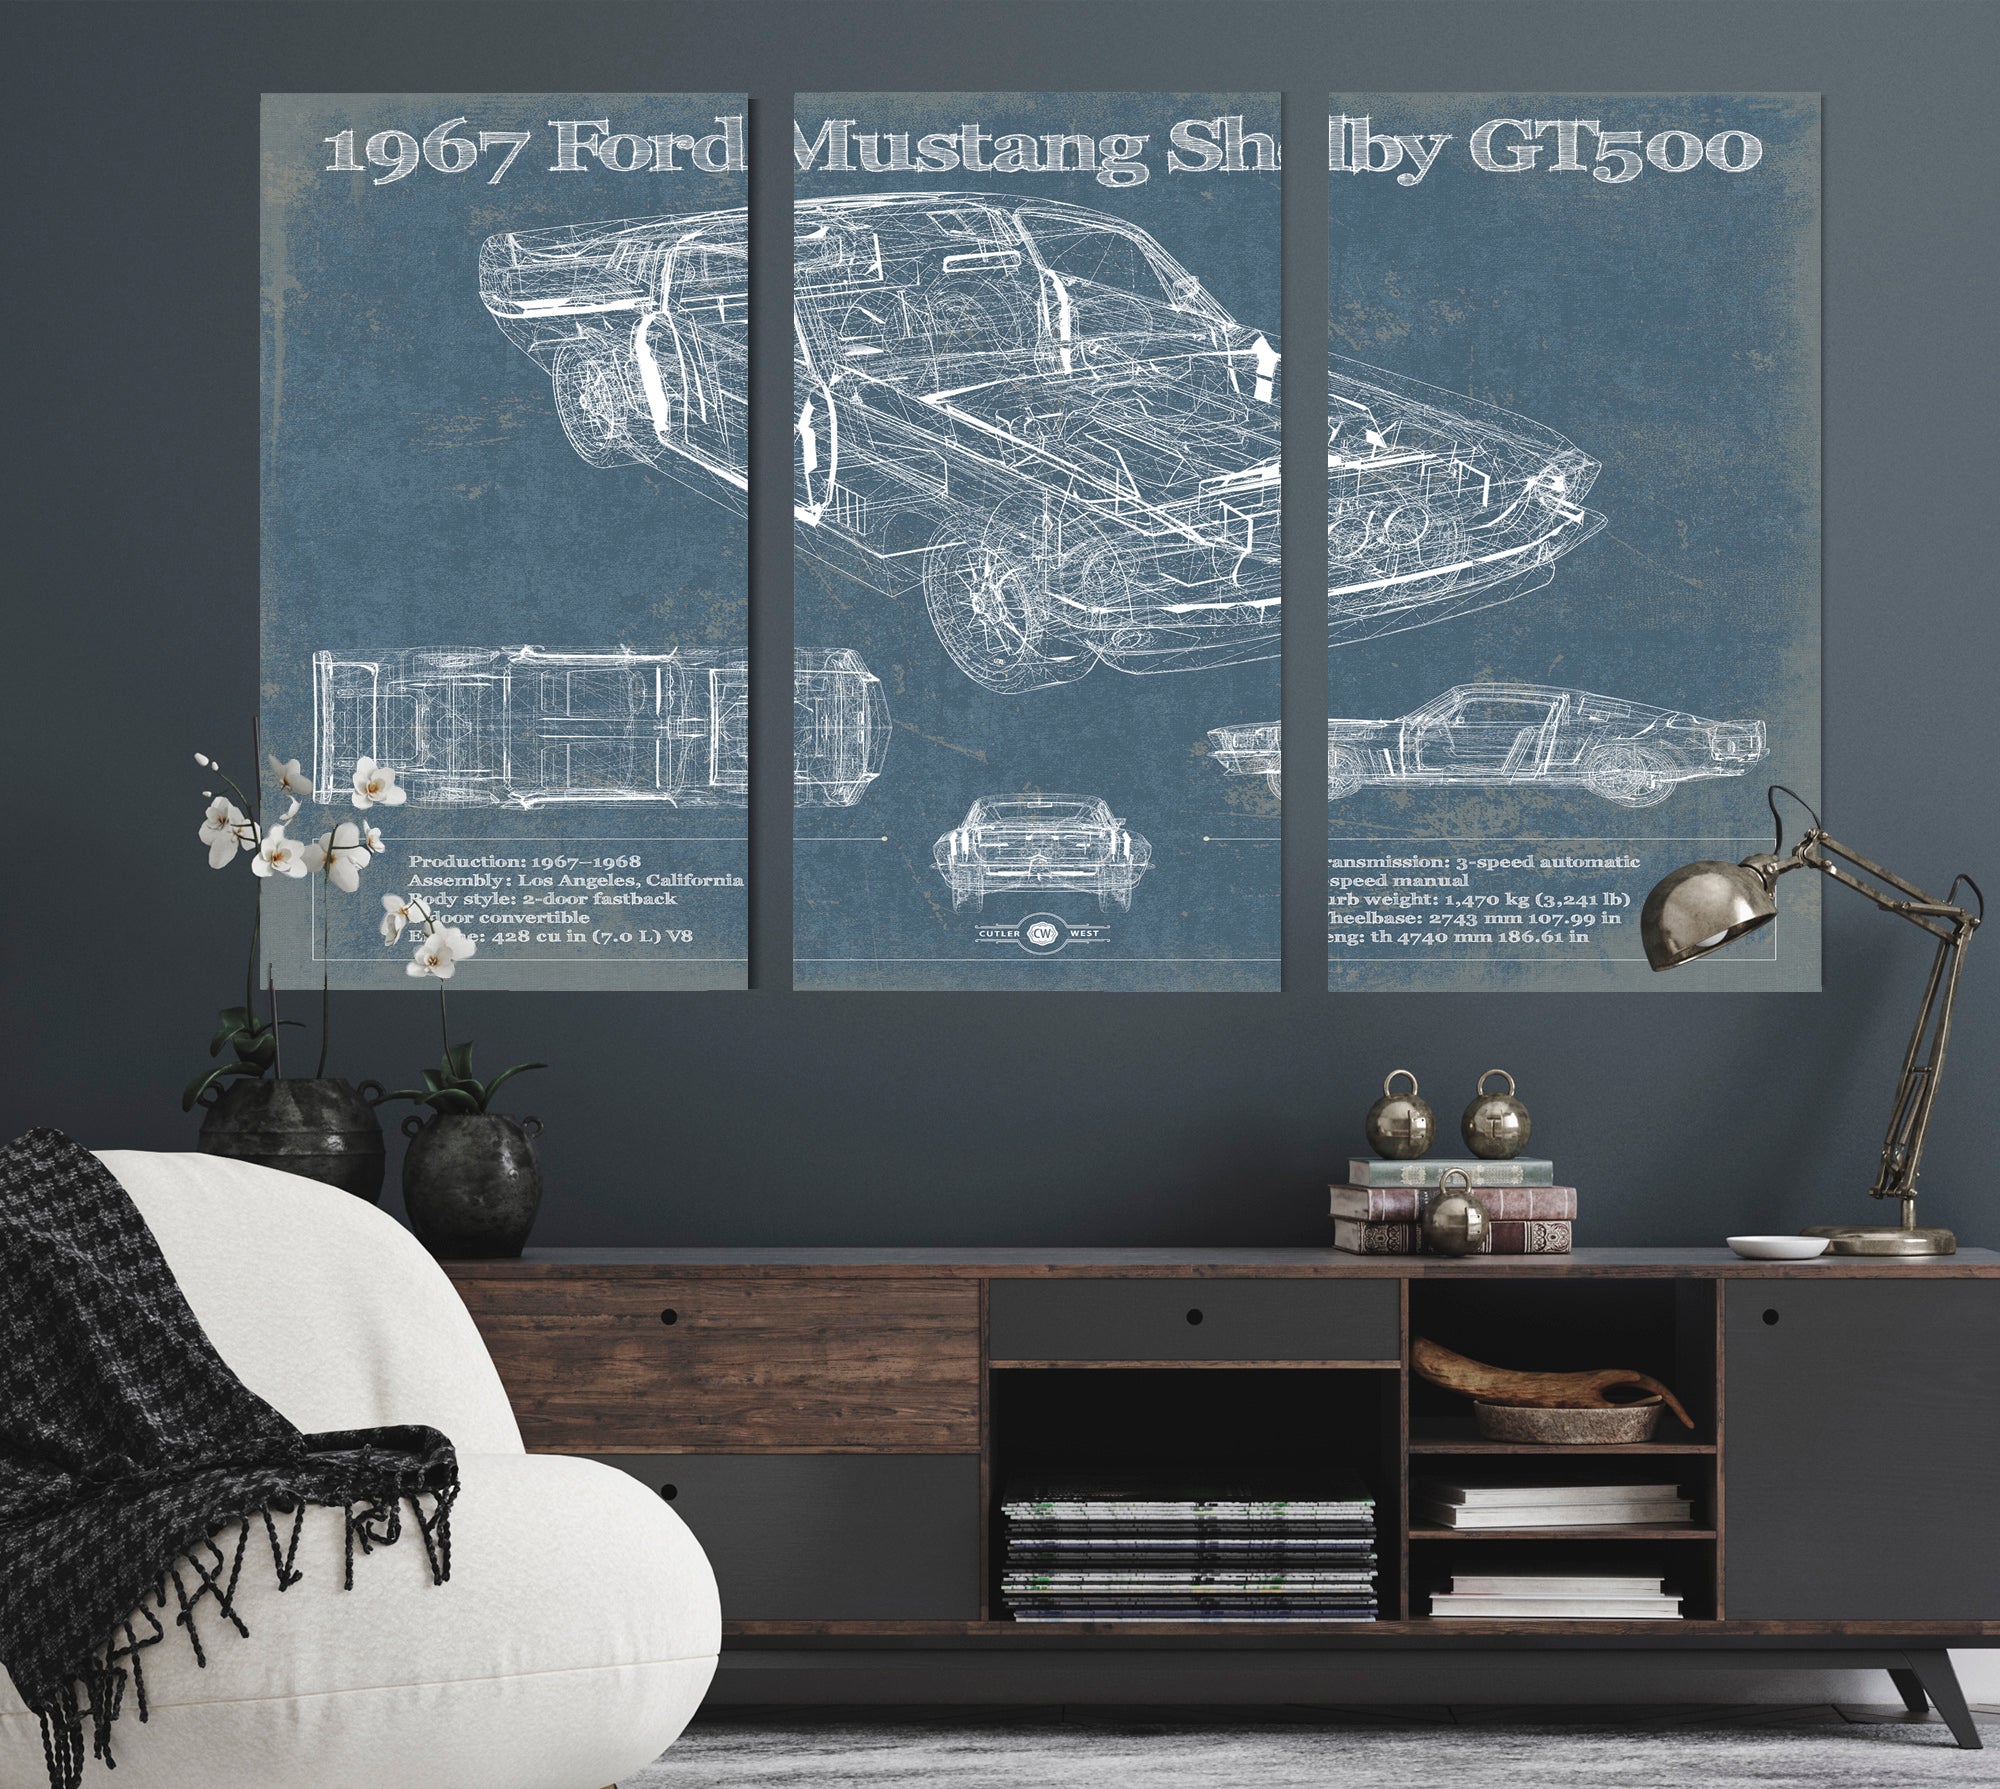 1967 Ford Mustang Shelby GT500 Vintage Blueprint Auto Print